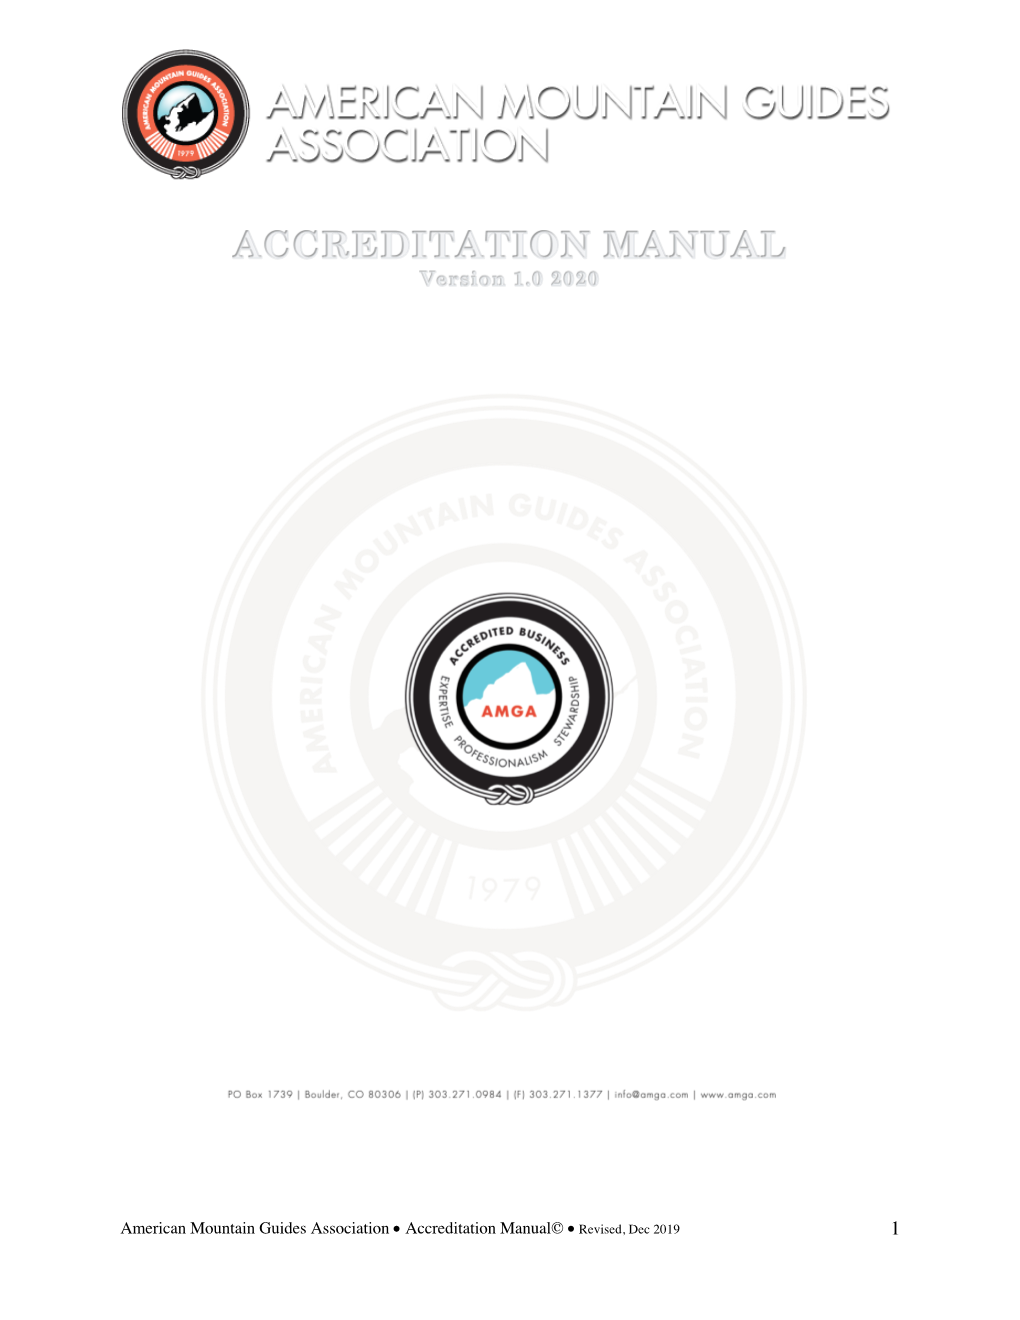 American Mountain Guides Association • Accreditation Manual© • Revised, Dec 2019 1